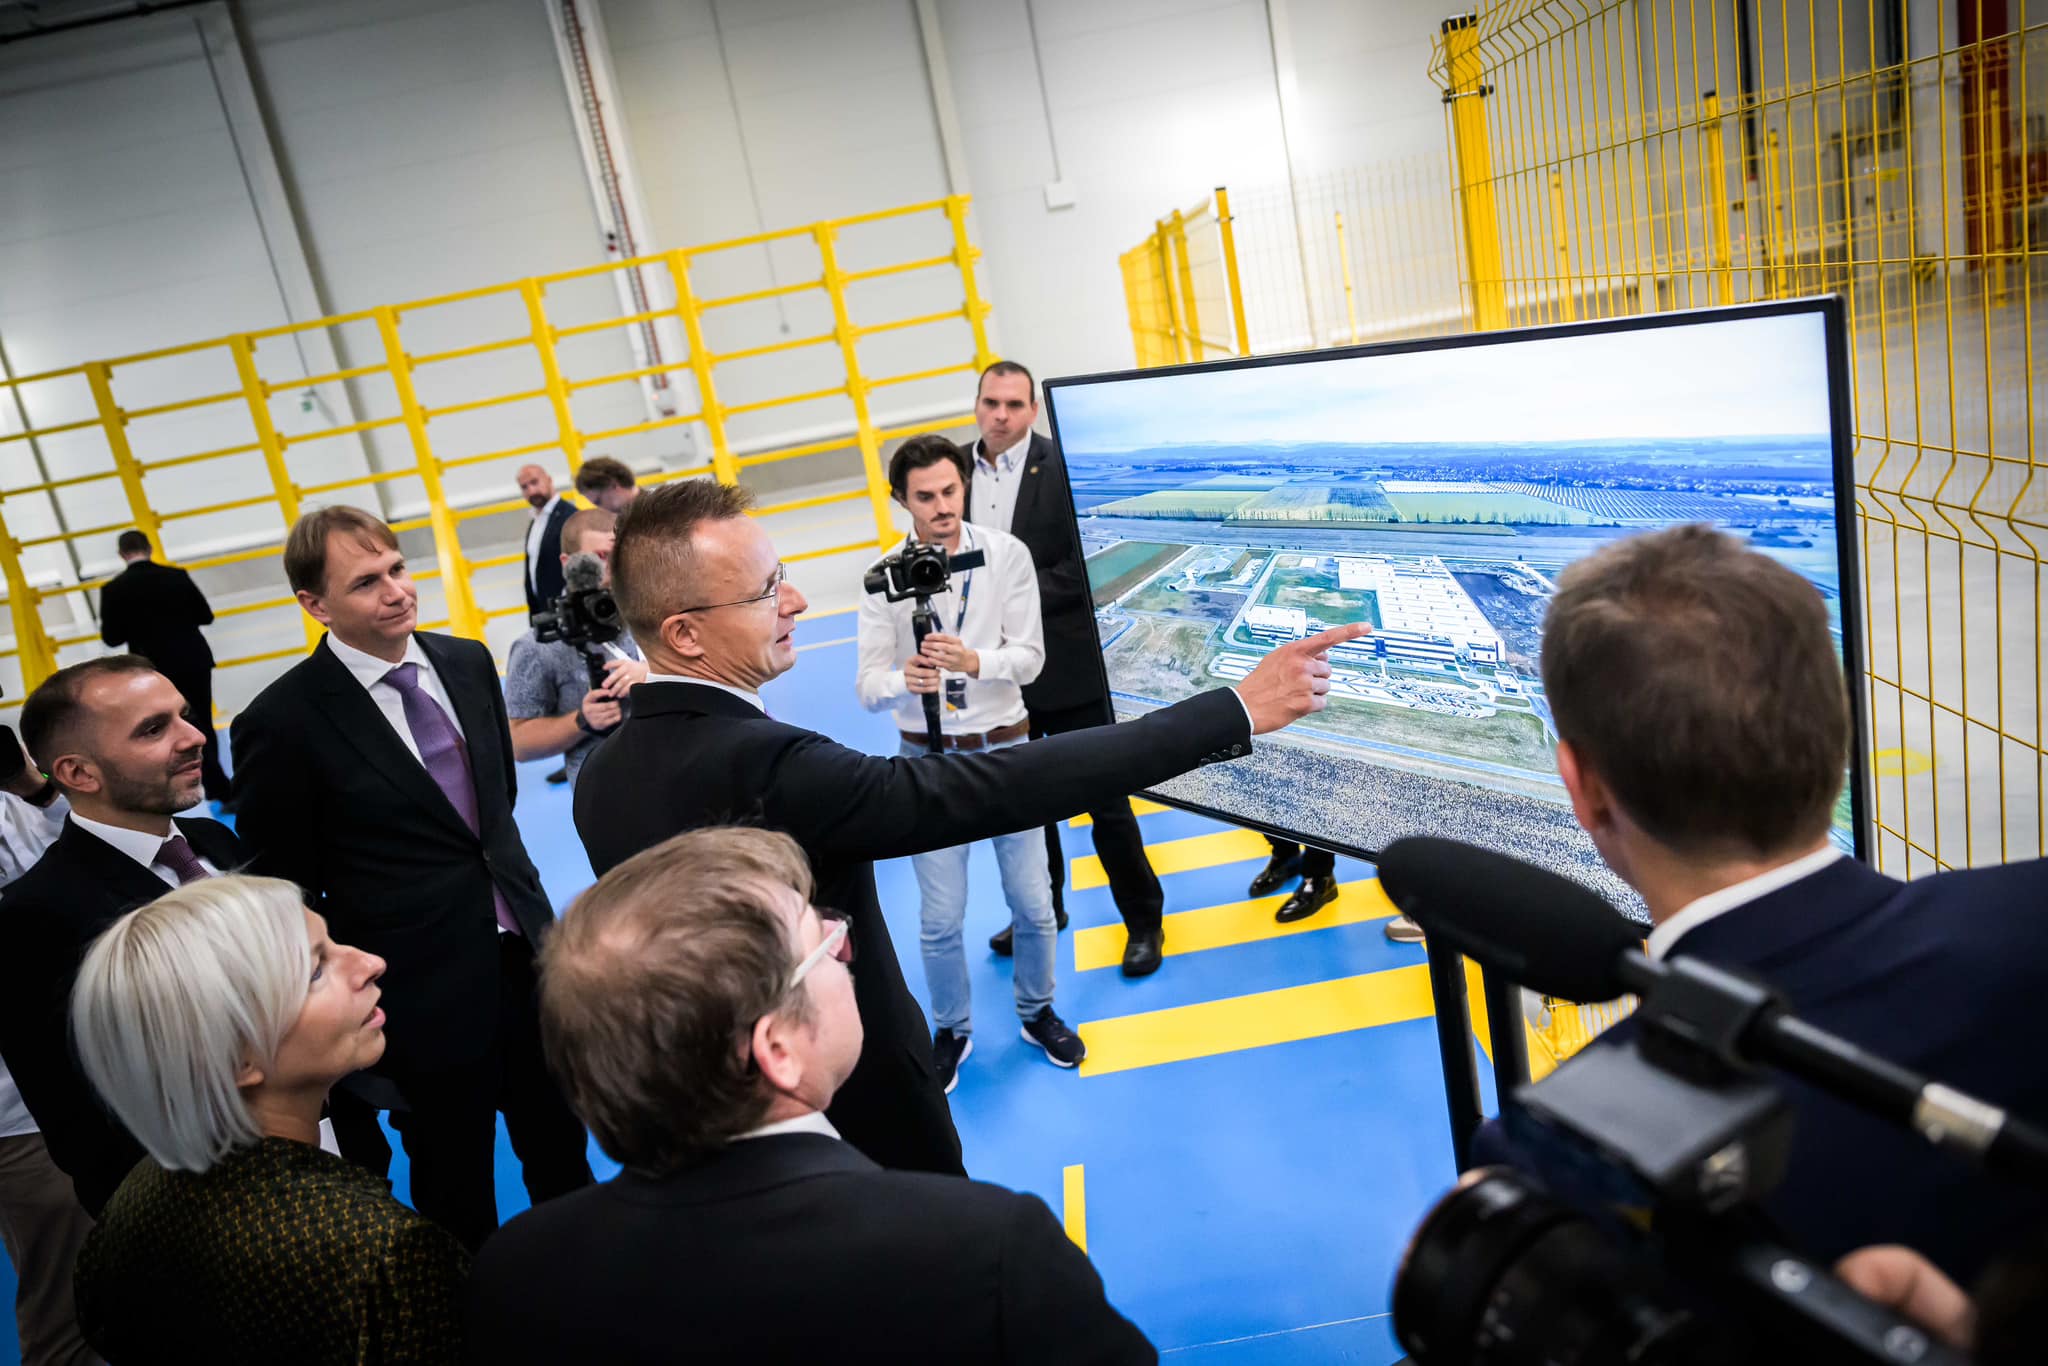 First Phase of New 52 Billion Forint Automotive Industry Plant  Inaugurated in North-Eastern Hungary